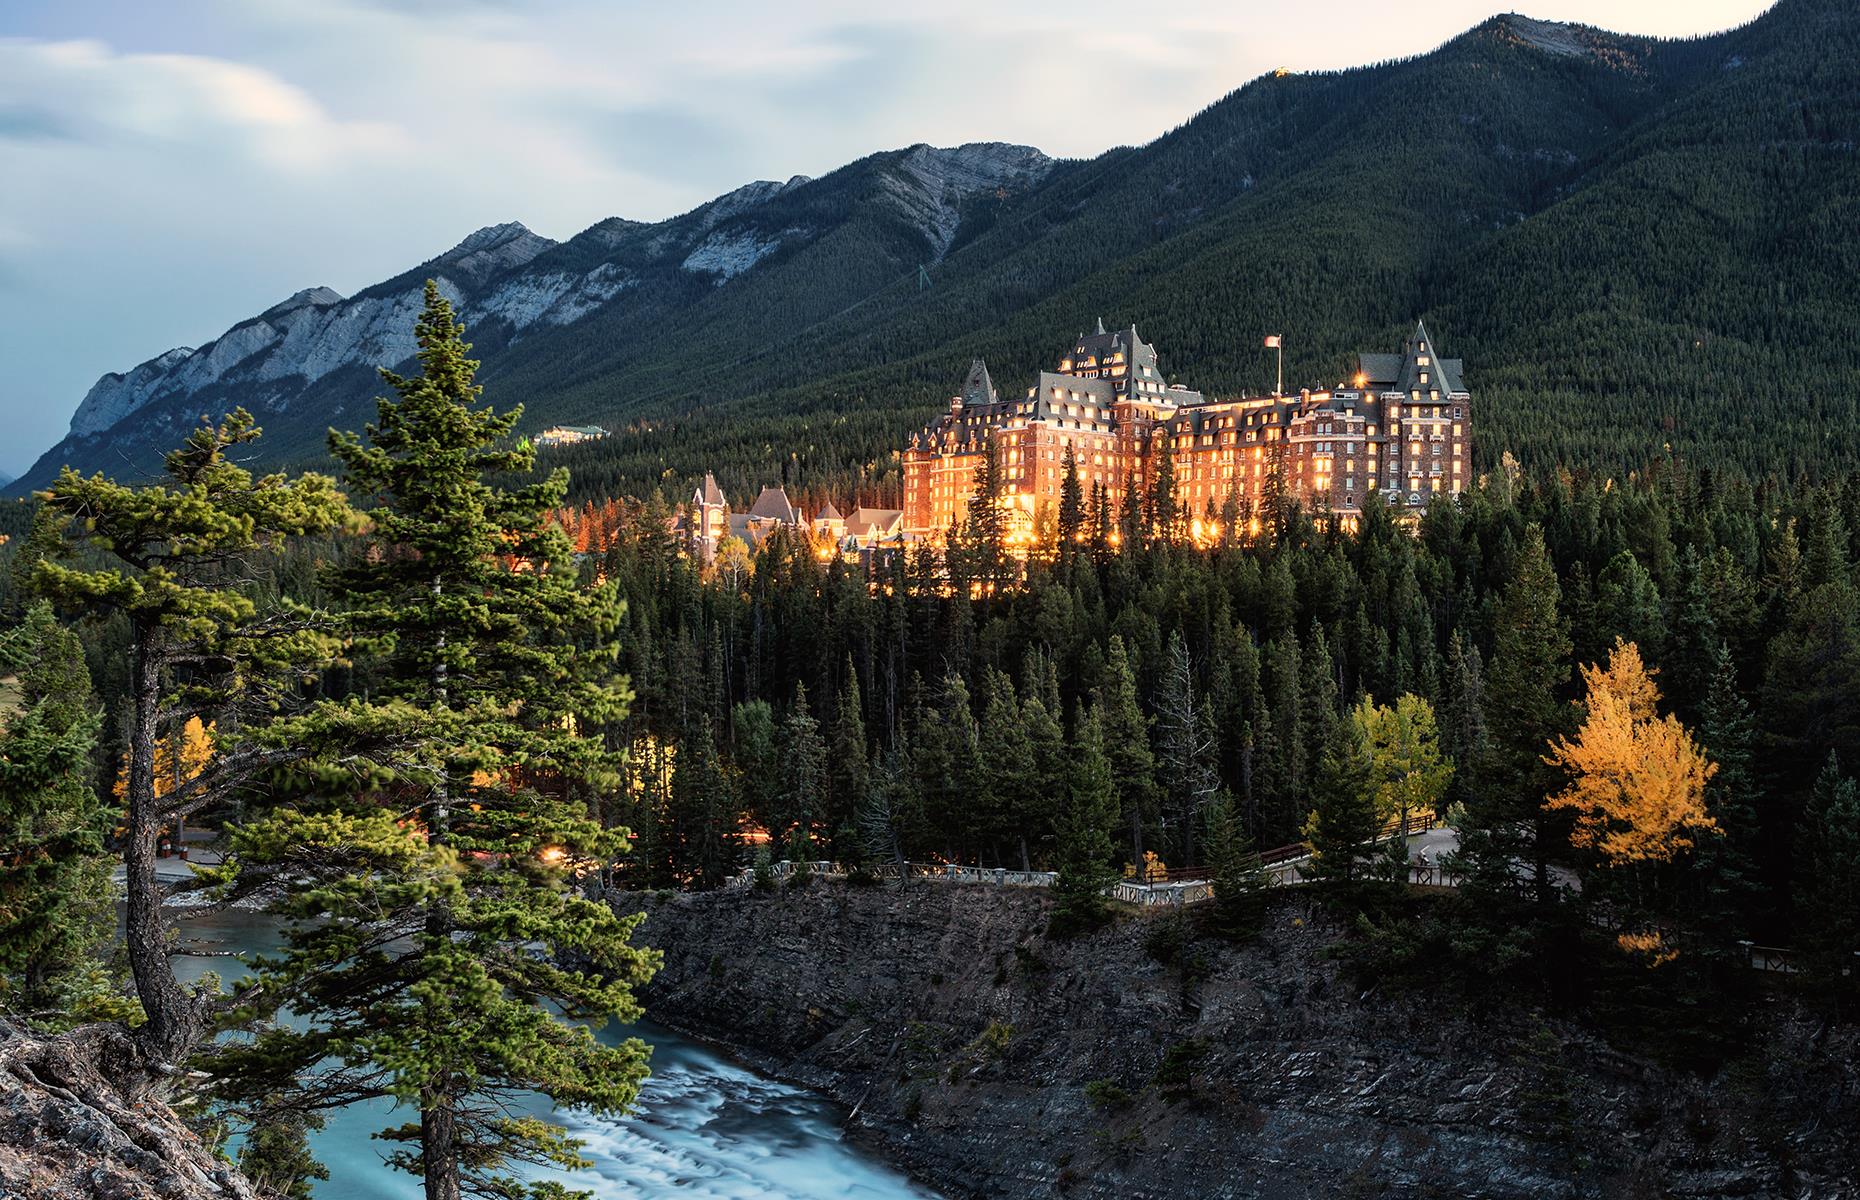 <p>A sprawling Rocky Mountains estate originally dating to the 1880s, <a href="https://www.fairmont.com/banff-springs/">Fairmont Banff Springs</a> looks more like a castle than a hotel – and it's supposedly got all the spooks and spirits you might expect from a centuries-old fortress. The resort is renowned for its swish spa, sprawling golf course and elegant suites, but it's also known for its ghostly residents. Among them is said to be a fated bride whose dress tragically set on fire before her nuptials. The ghost of friendly bellman Sam also apparently haunts the halls.</p>